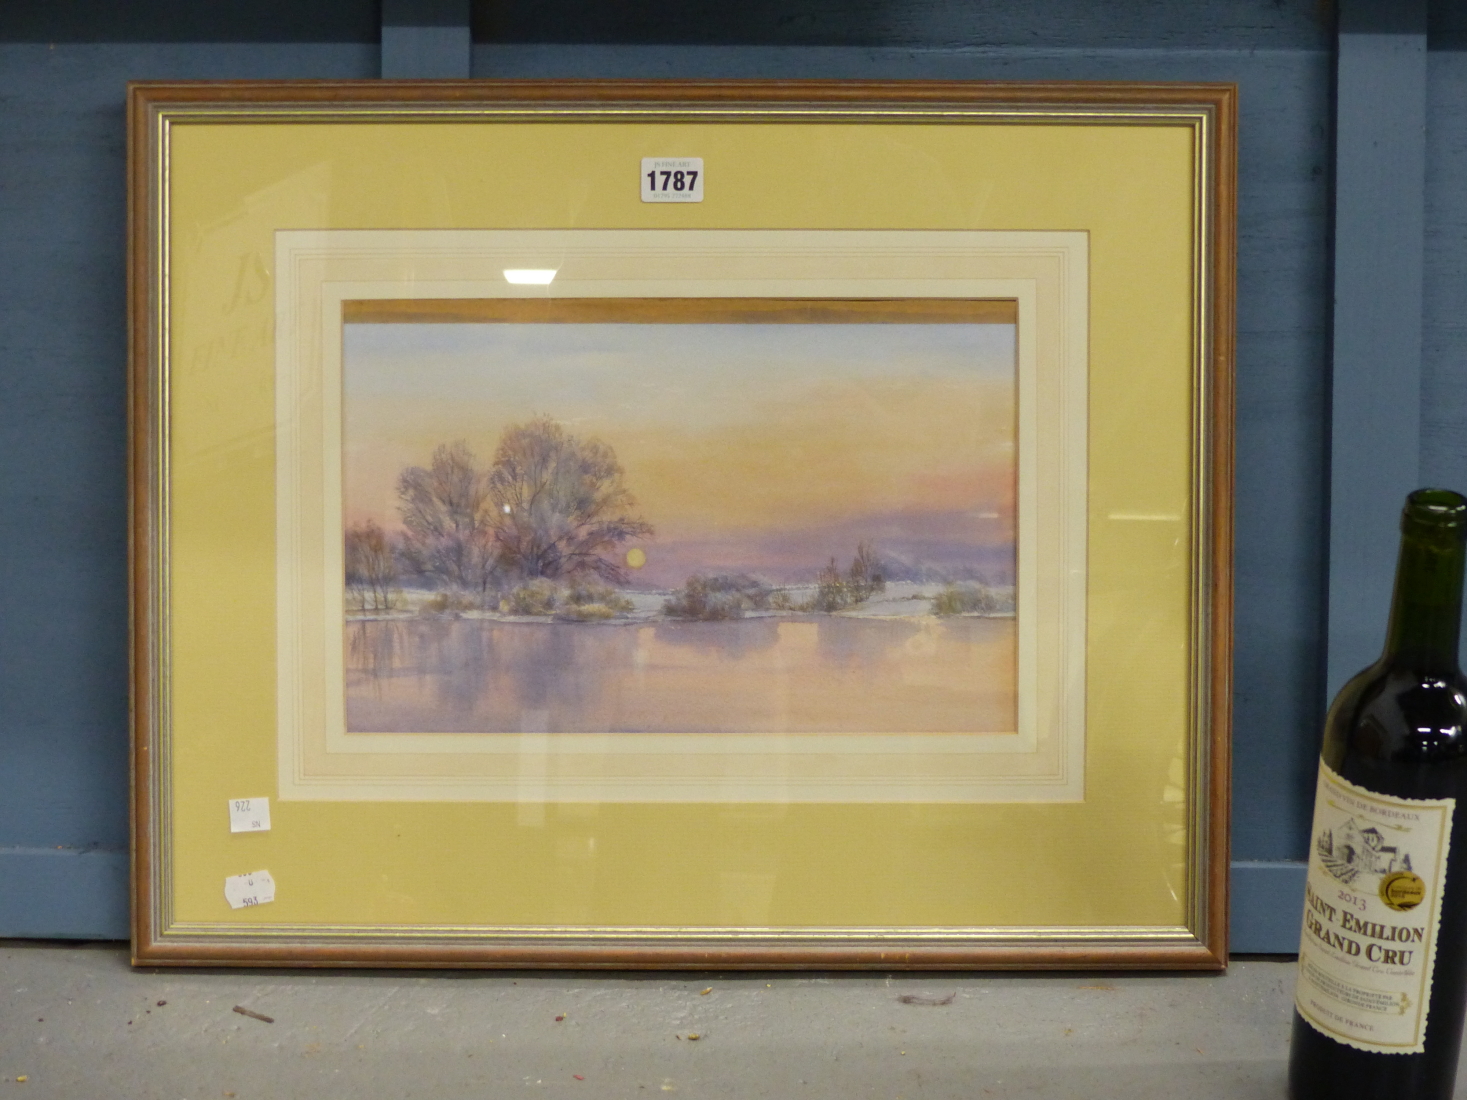 VALERIE PETTS (20TH CENTURY) ARR, WINTER EVENING AT HARDWICK, SIGNED, WATERCOLOUR, 33.5 X 21.5CM. - Image 3 of 5